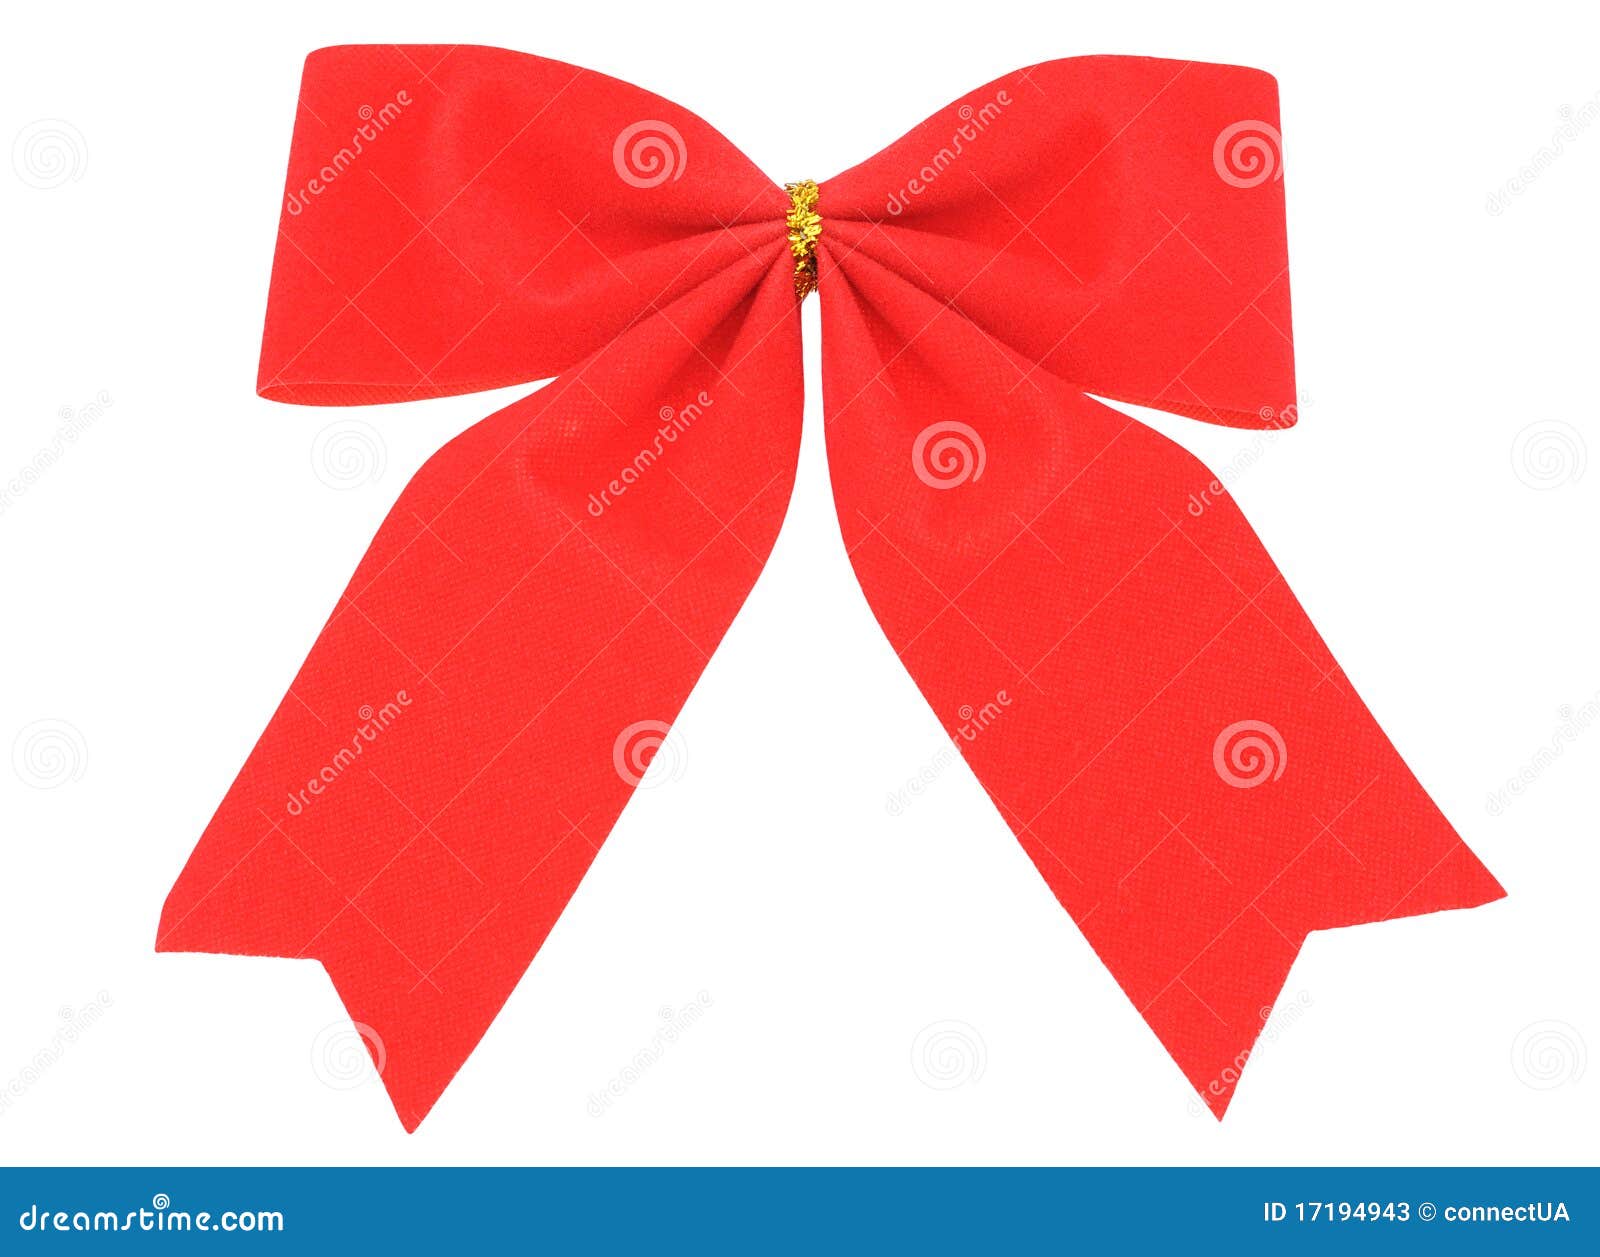 Christmas tree decoration-red bow, on a white background.